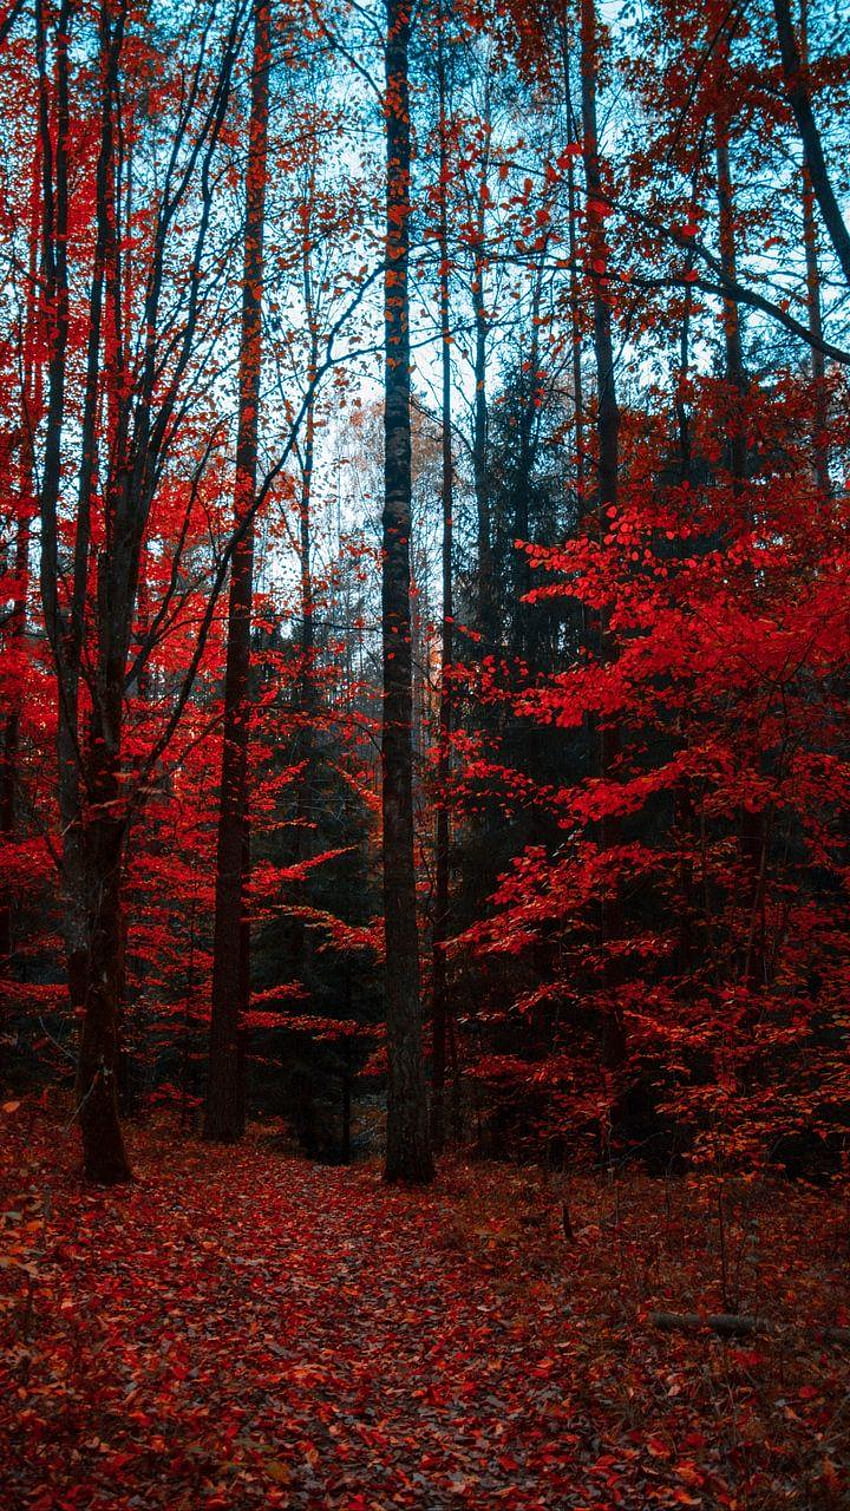 Red leaves on trees in the forest - Woods